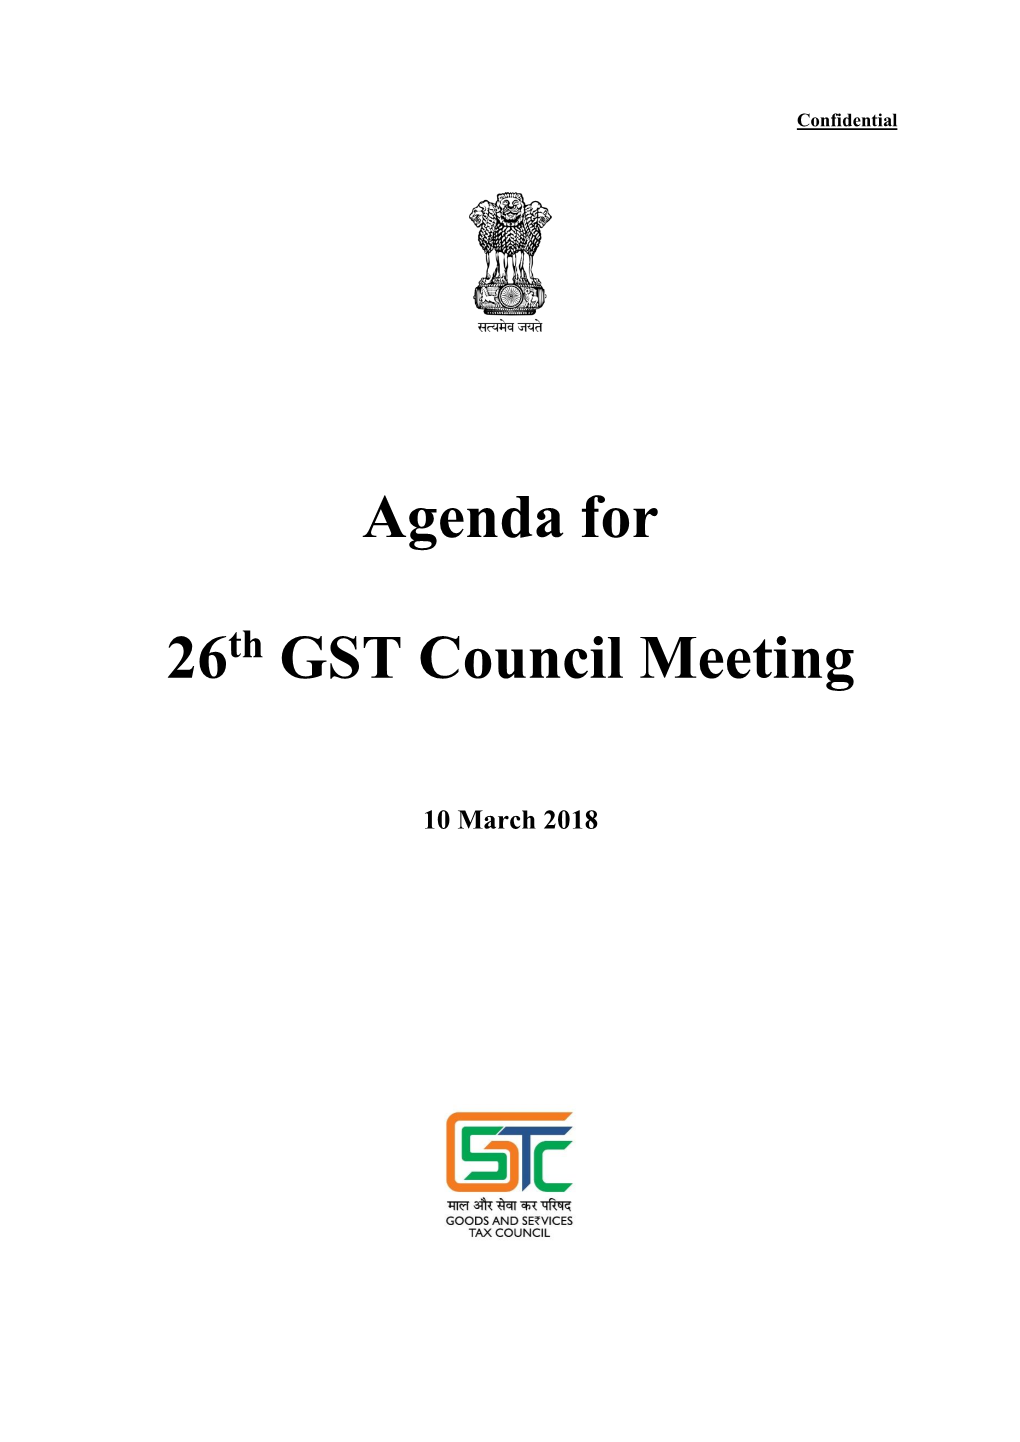 Agenda for 26 GST Council Meeting